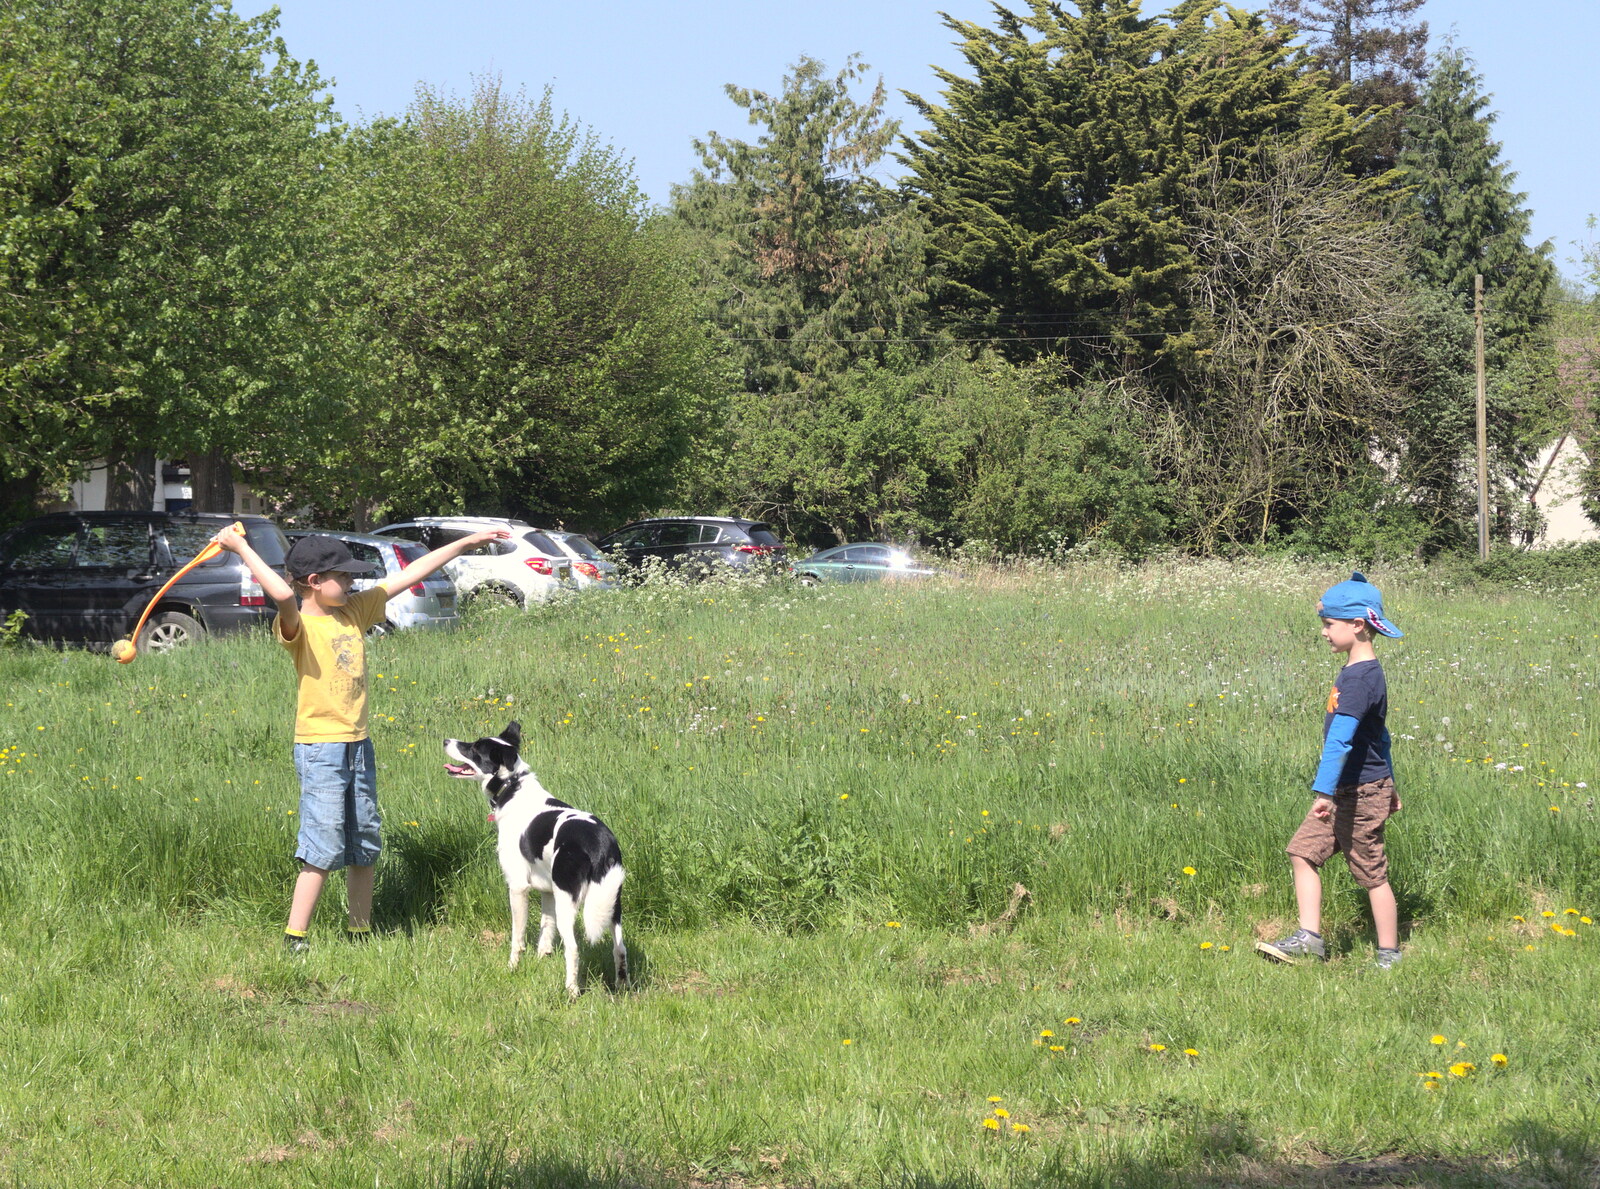 The boys find a dog to play with from A Bike Ride to the Railway Tavern, Mellis, Suffolk - 7th May 2018